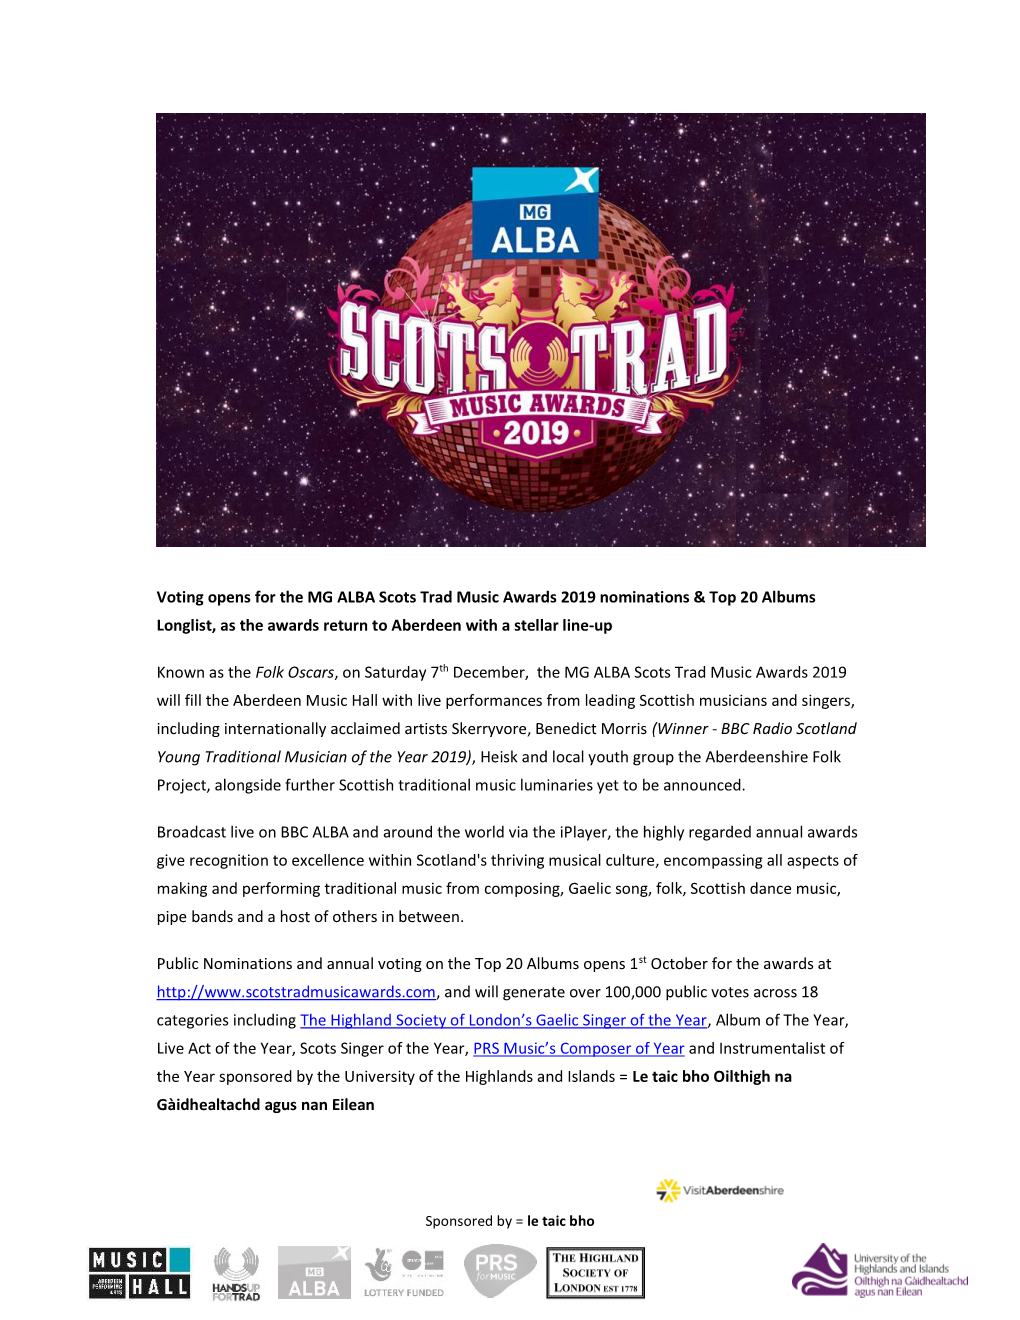 Voting Opens for the MG ALBA Scots Trad Music Awards 2019 Nominations & Top 20 Albums Longlist, As the Awards Return to Aberdeen with a Stellar Line-Up